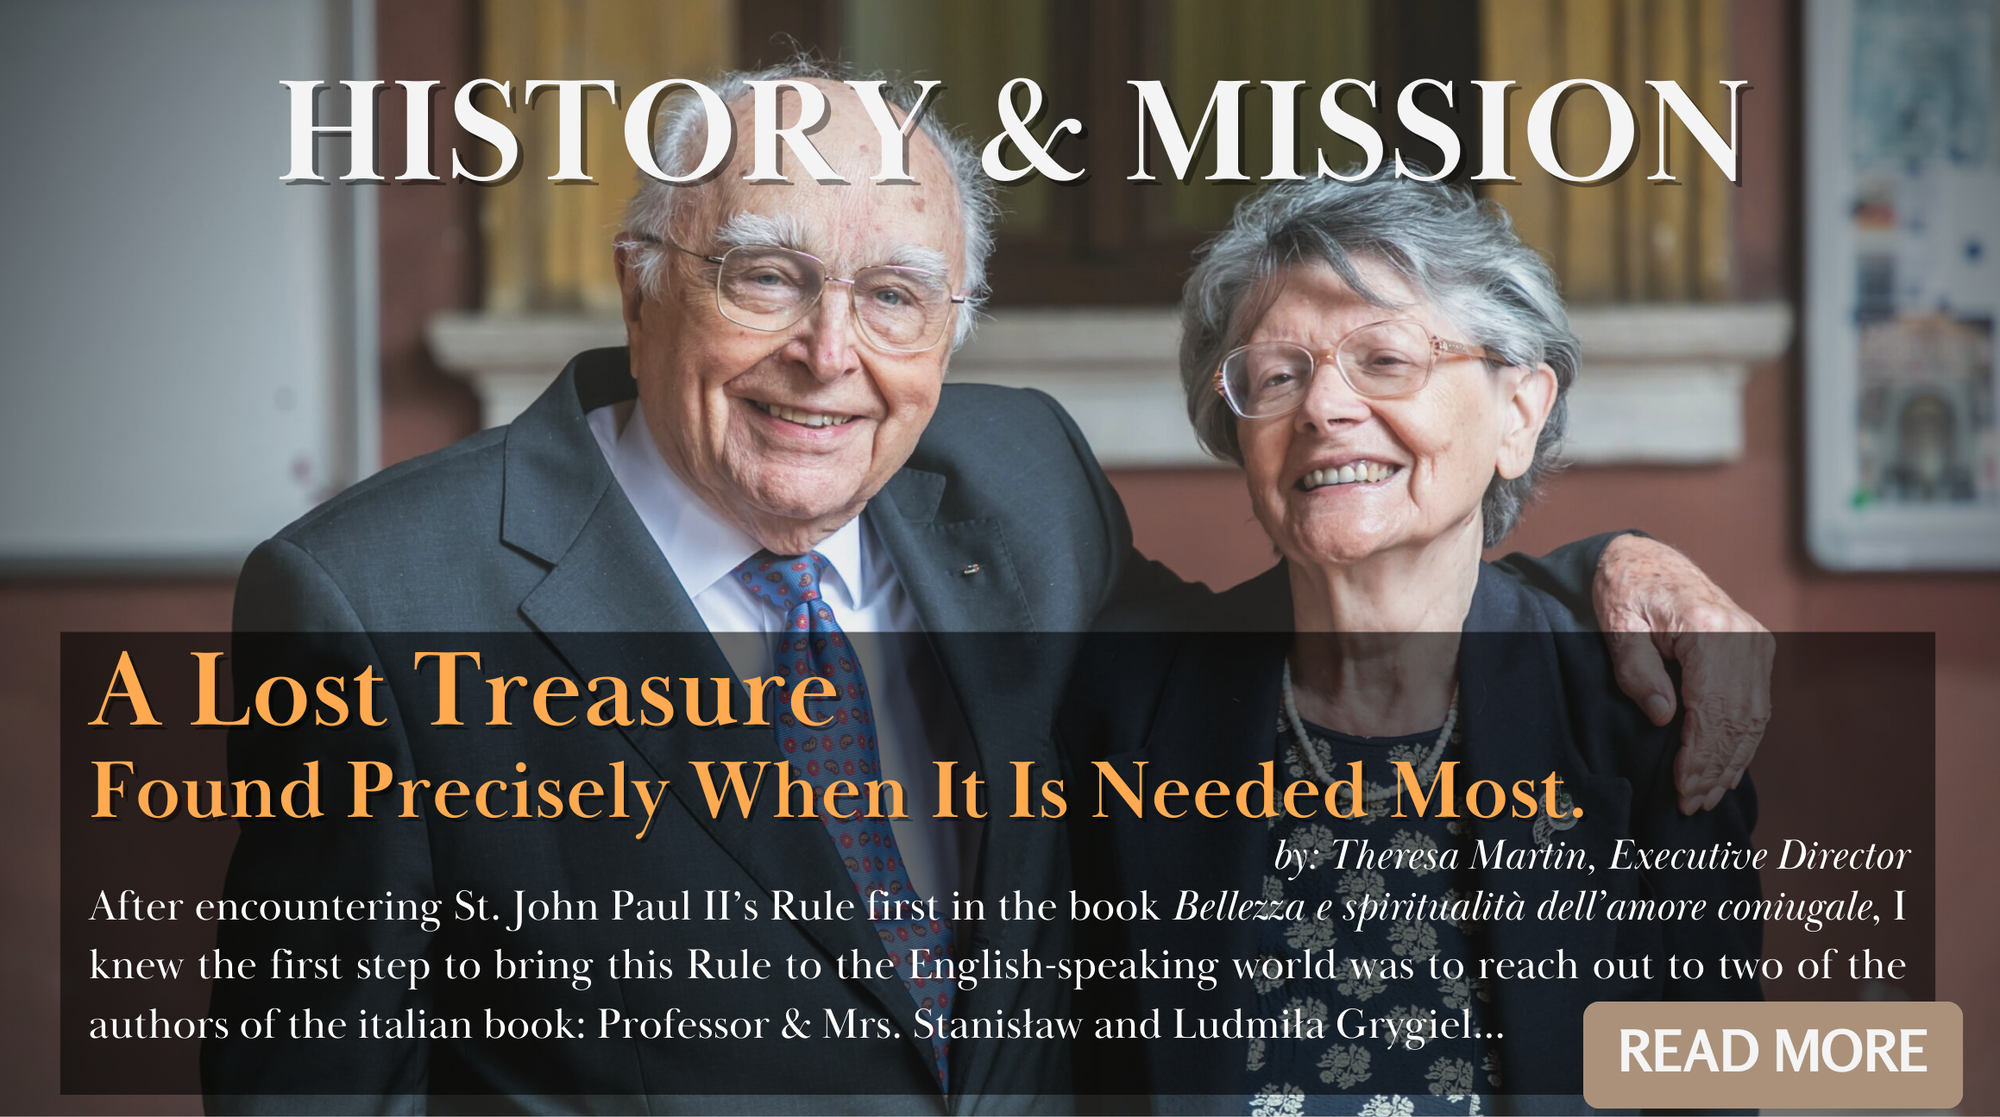 History & Mission: "A Lost Treasure Found – Precisely When It Is Needed Most."